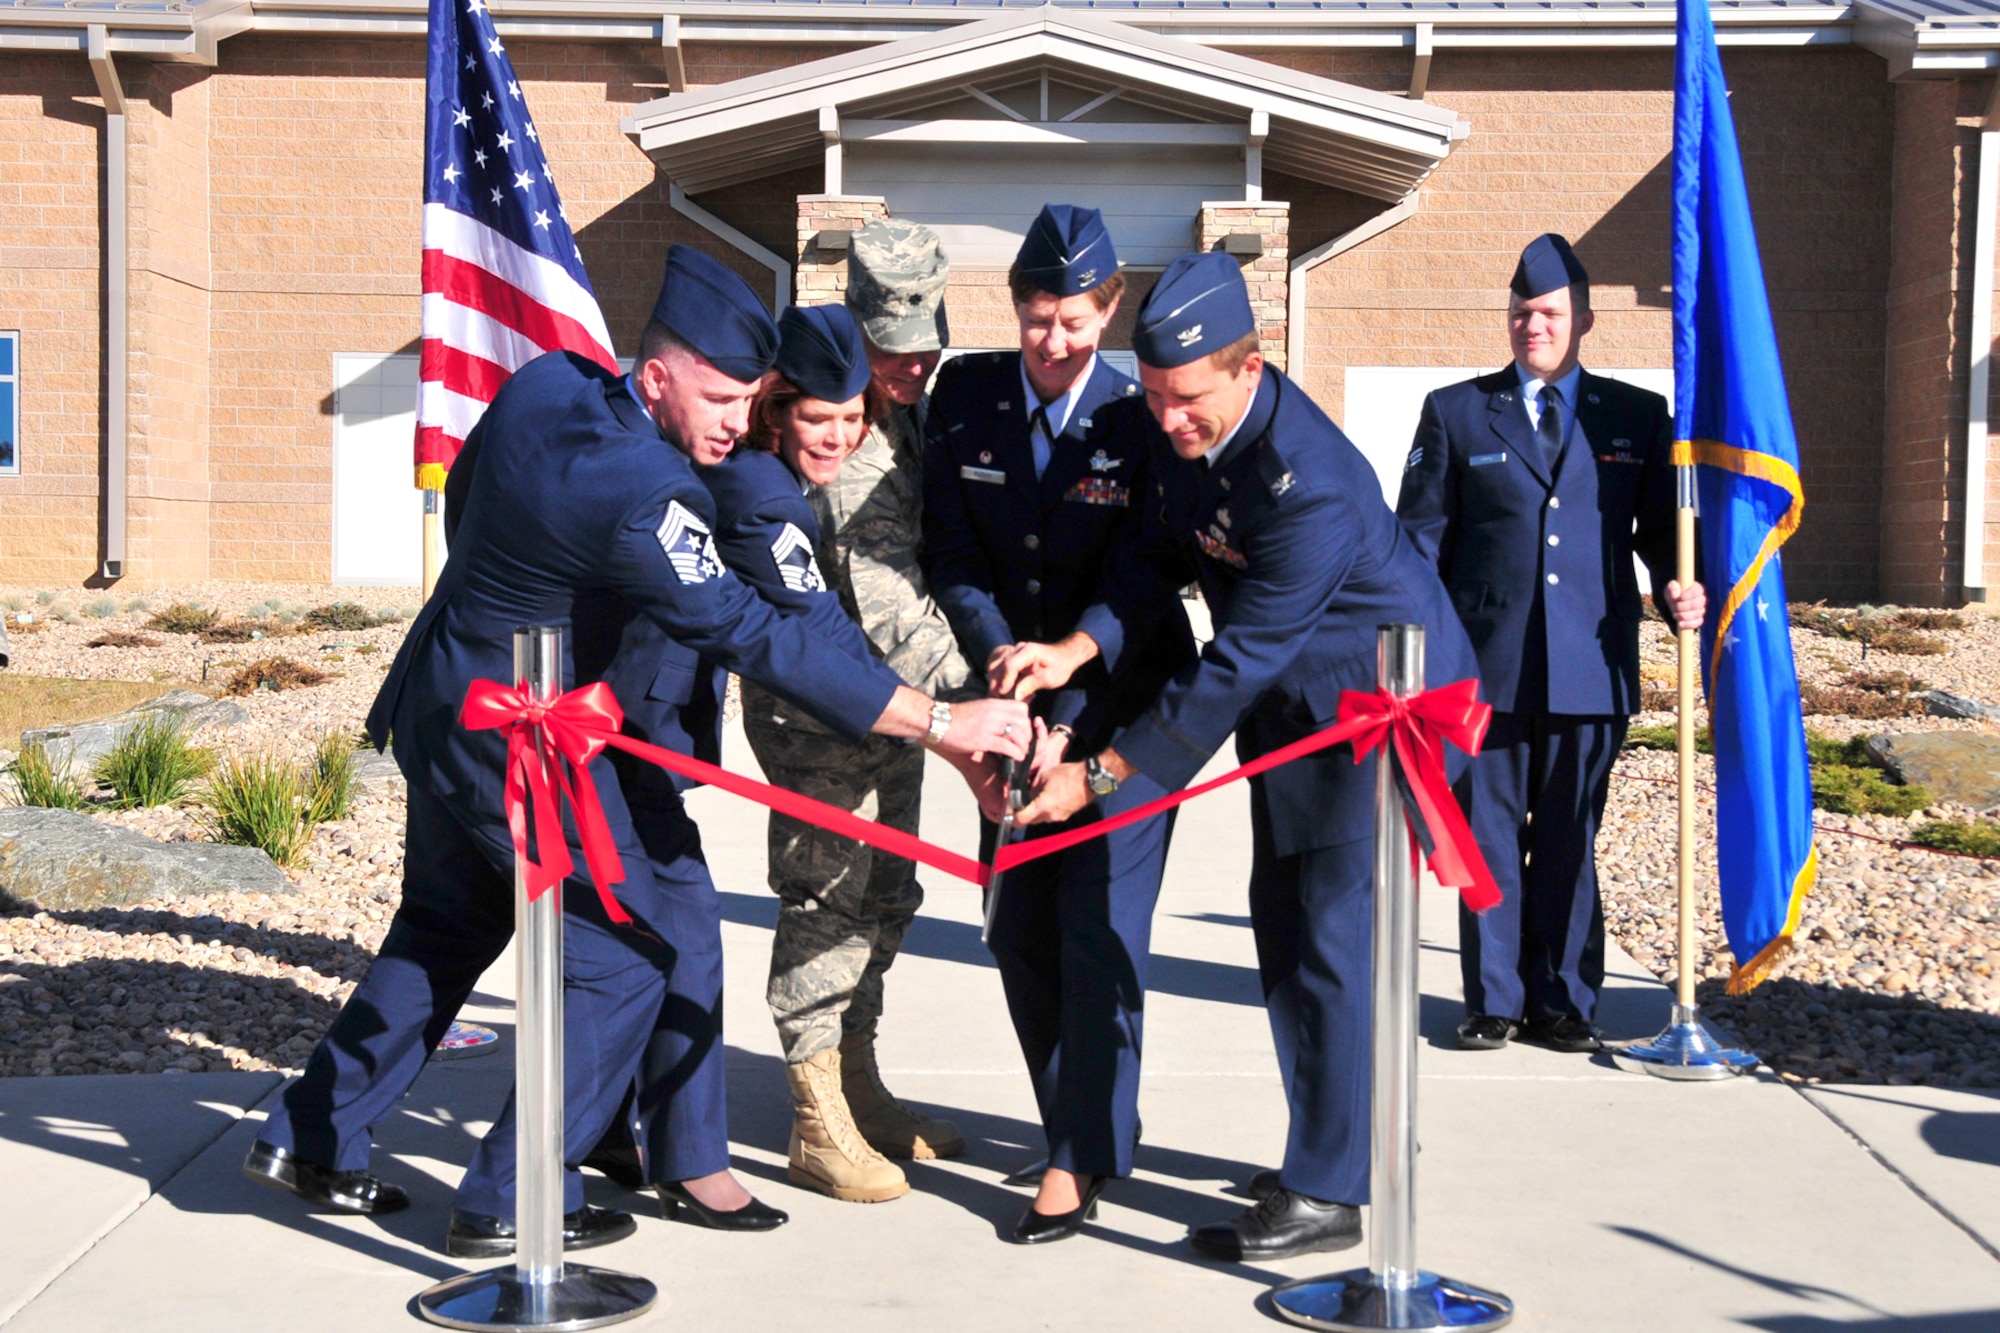 From left, Chief Master Sgts. Rocky Hart, Michelle Zayatz, Lt. Col David Schaefer, Cols. Karen Rizzuti and Gene Odom cut the ribbon of the 310th Mission Support Group Aero Medical Dental Flight Building on Nov. 7 at Buckley Air Force Base, Colo. The new facility will provide personnel, manpower and medical services to the Reservists of the 310th Space Wing. (Air Force photo by Tech. Sgt. Nick Ontiveros)